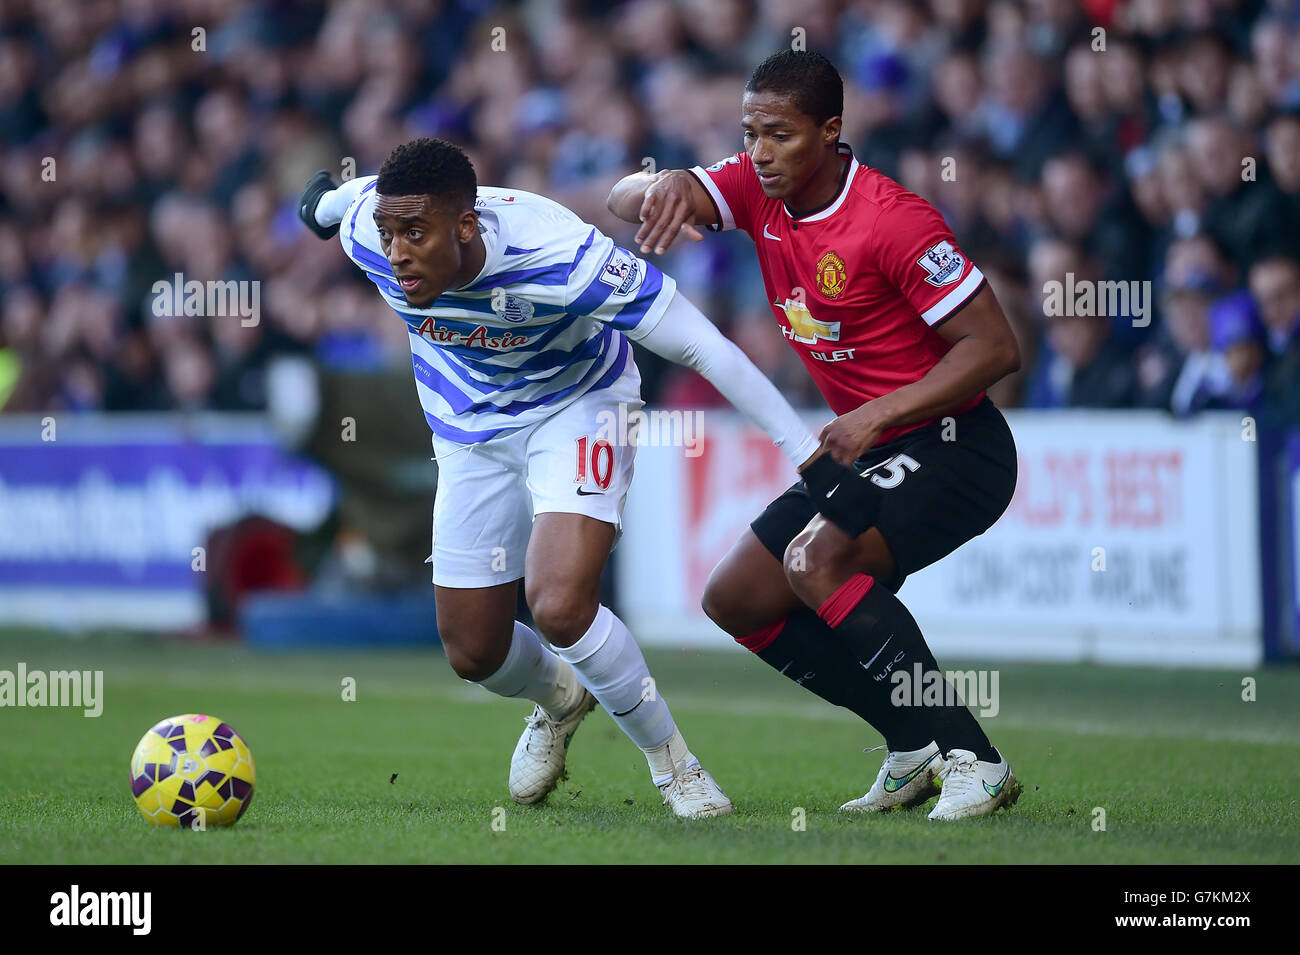 Queens Park Rangers' Leroy Fer (left) and Manchester United's Luis Antonio Valencia (right) battle for the ball during the Barclays Premier League match at Loftus Road, London. PRESS ASSOCIATION Photo. Picture date: Saturday January 17, 2015. See PA story SOCCER QPR. Picture credit should read: Adam Davy/PA Wire. Stock Photo